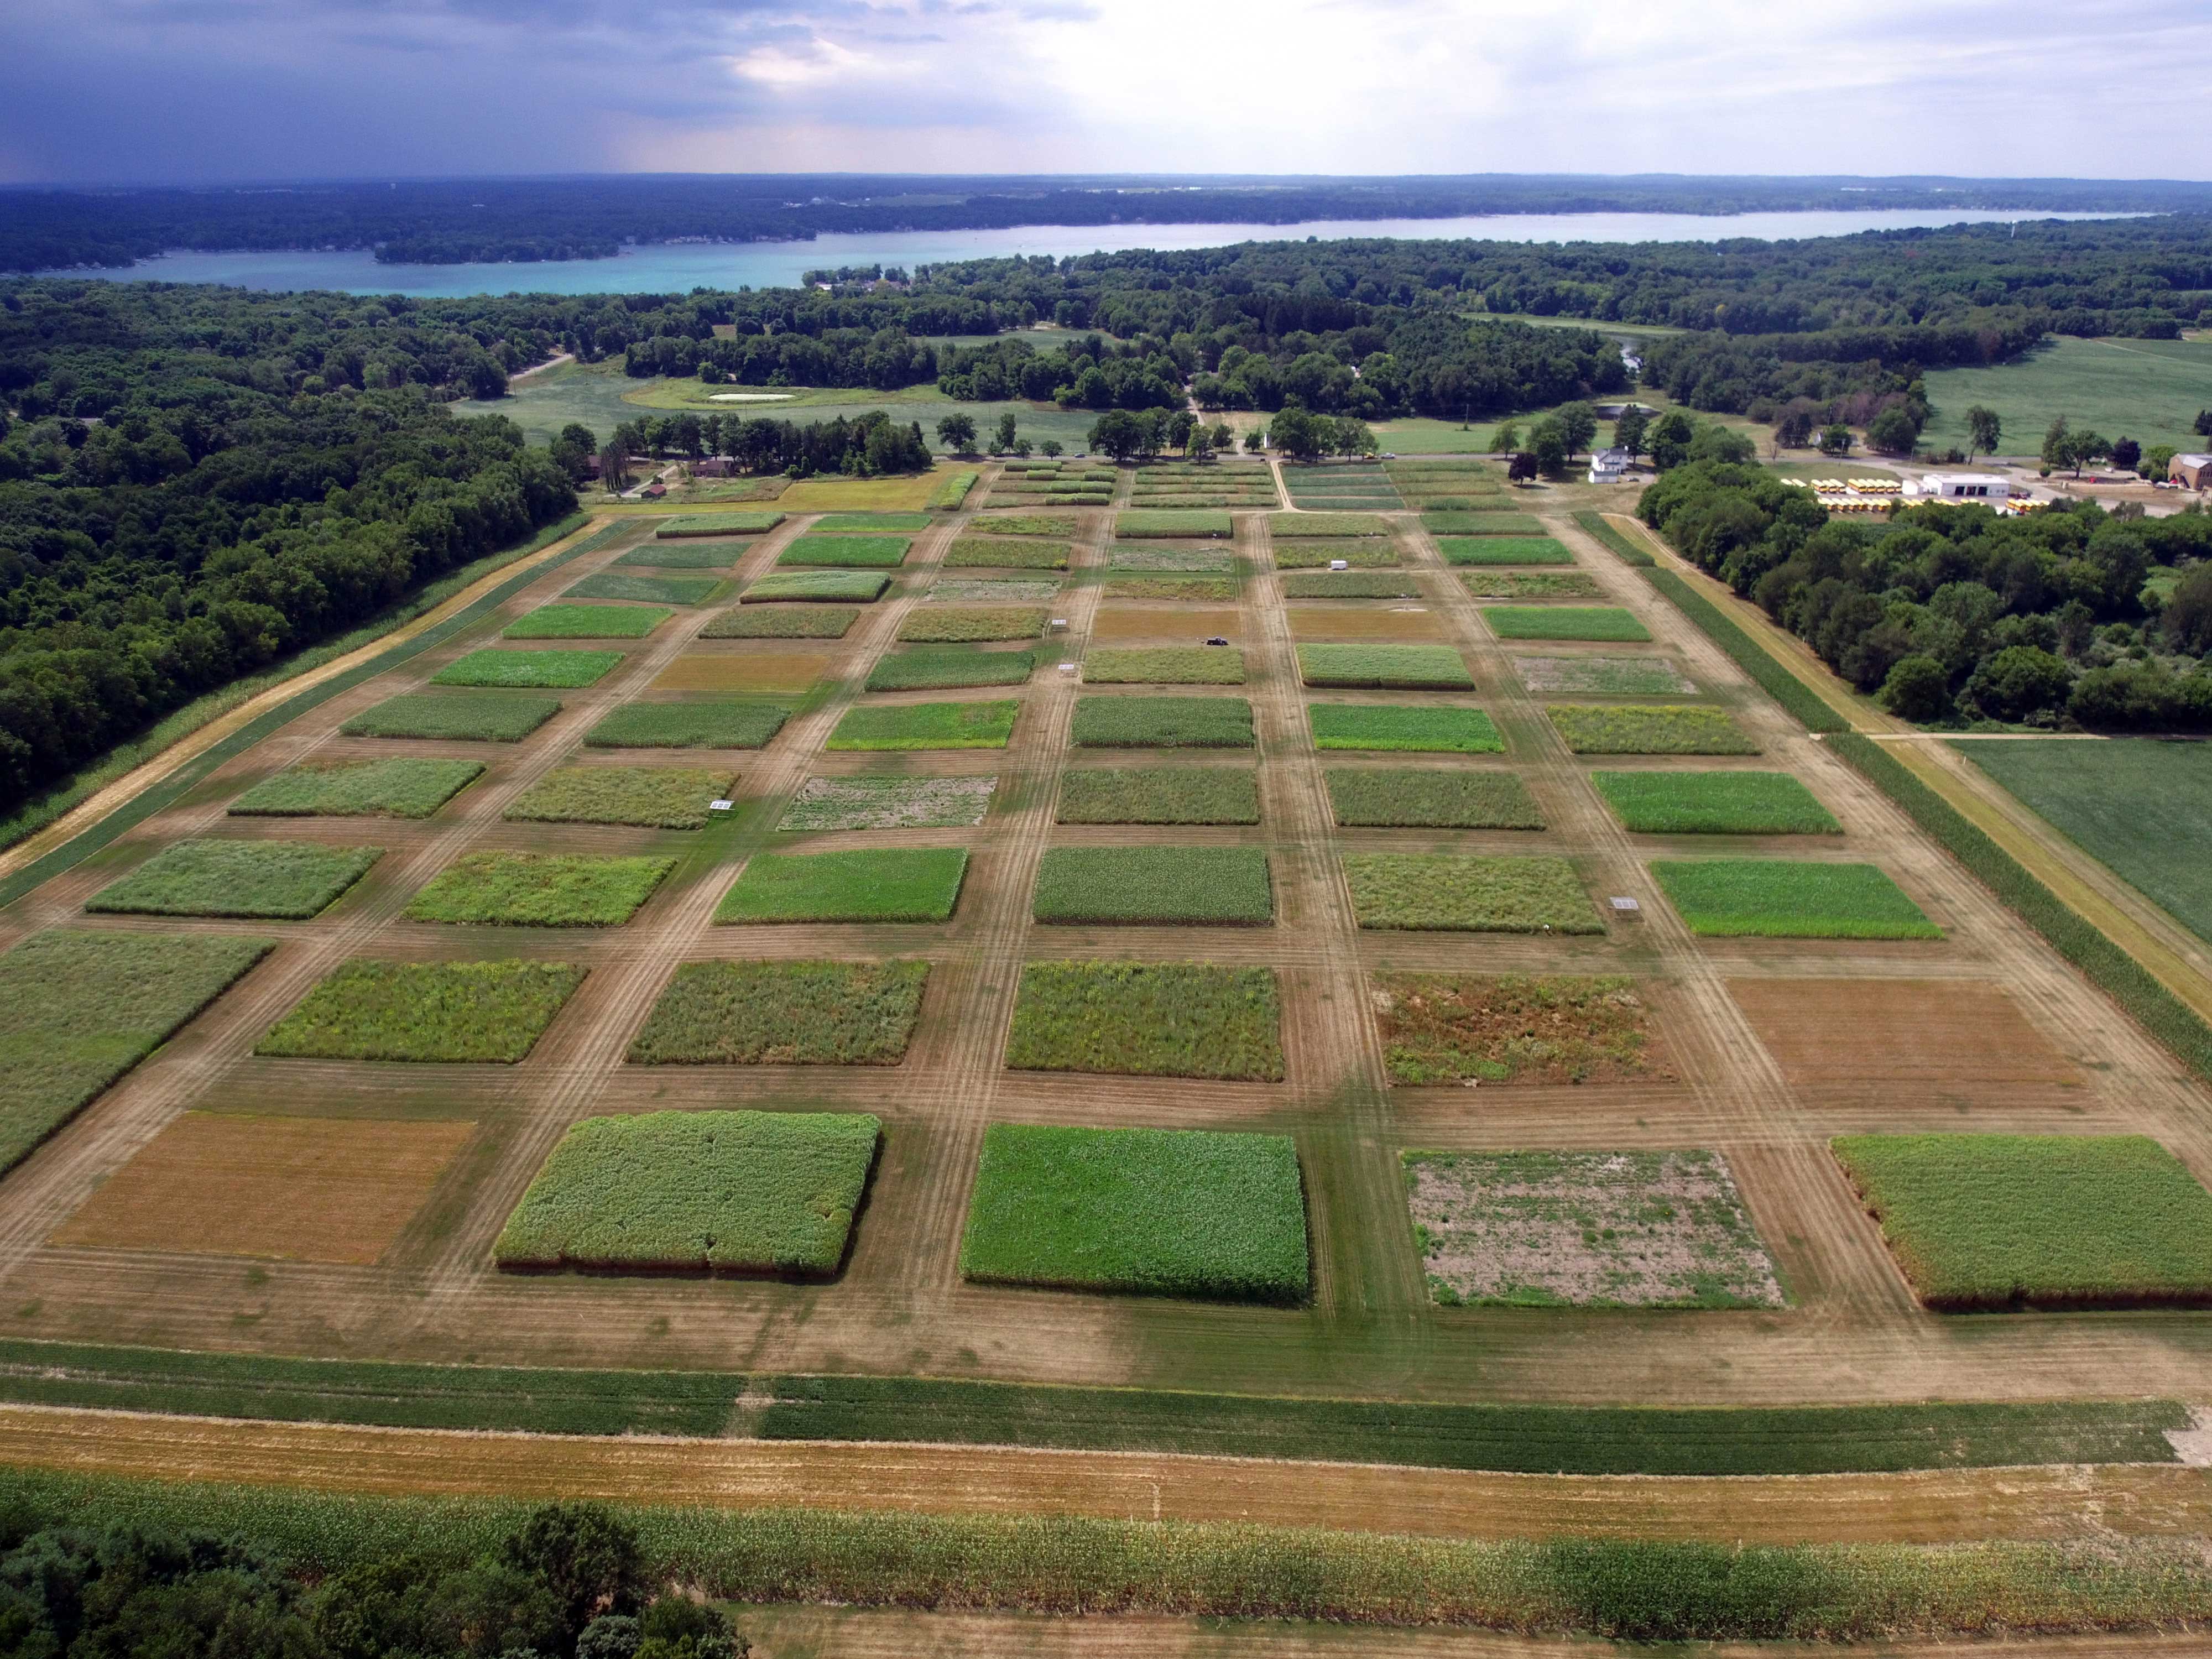 Aerial view of field with grid of square-shaped plots 